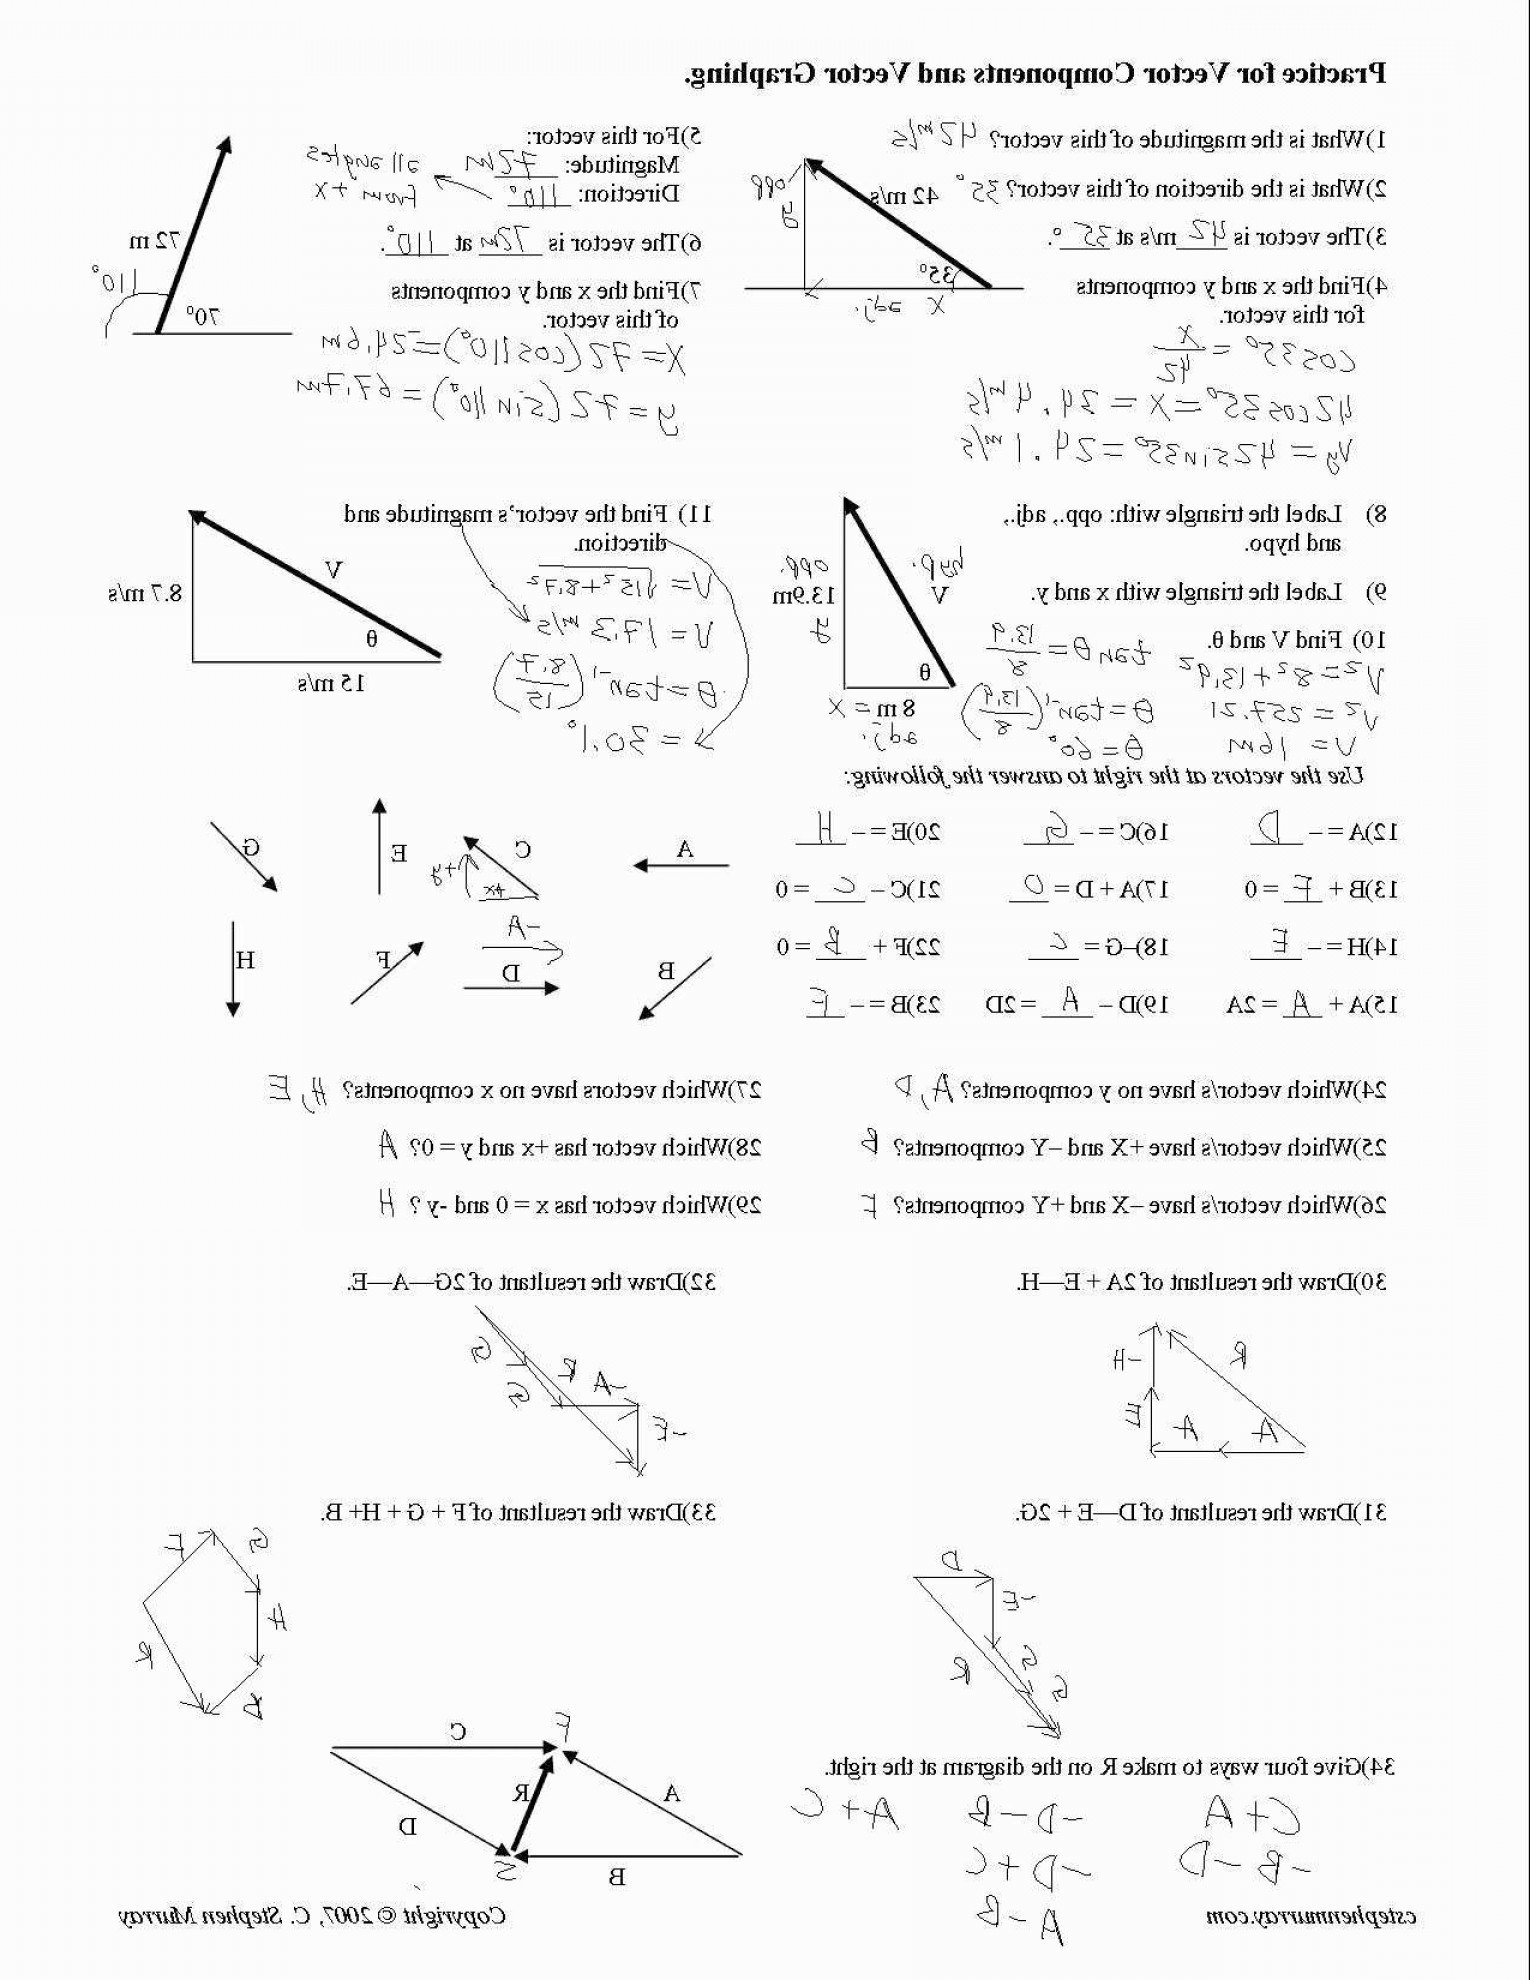 osmosis-and-tonicity-worksheet-excelguider